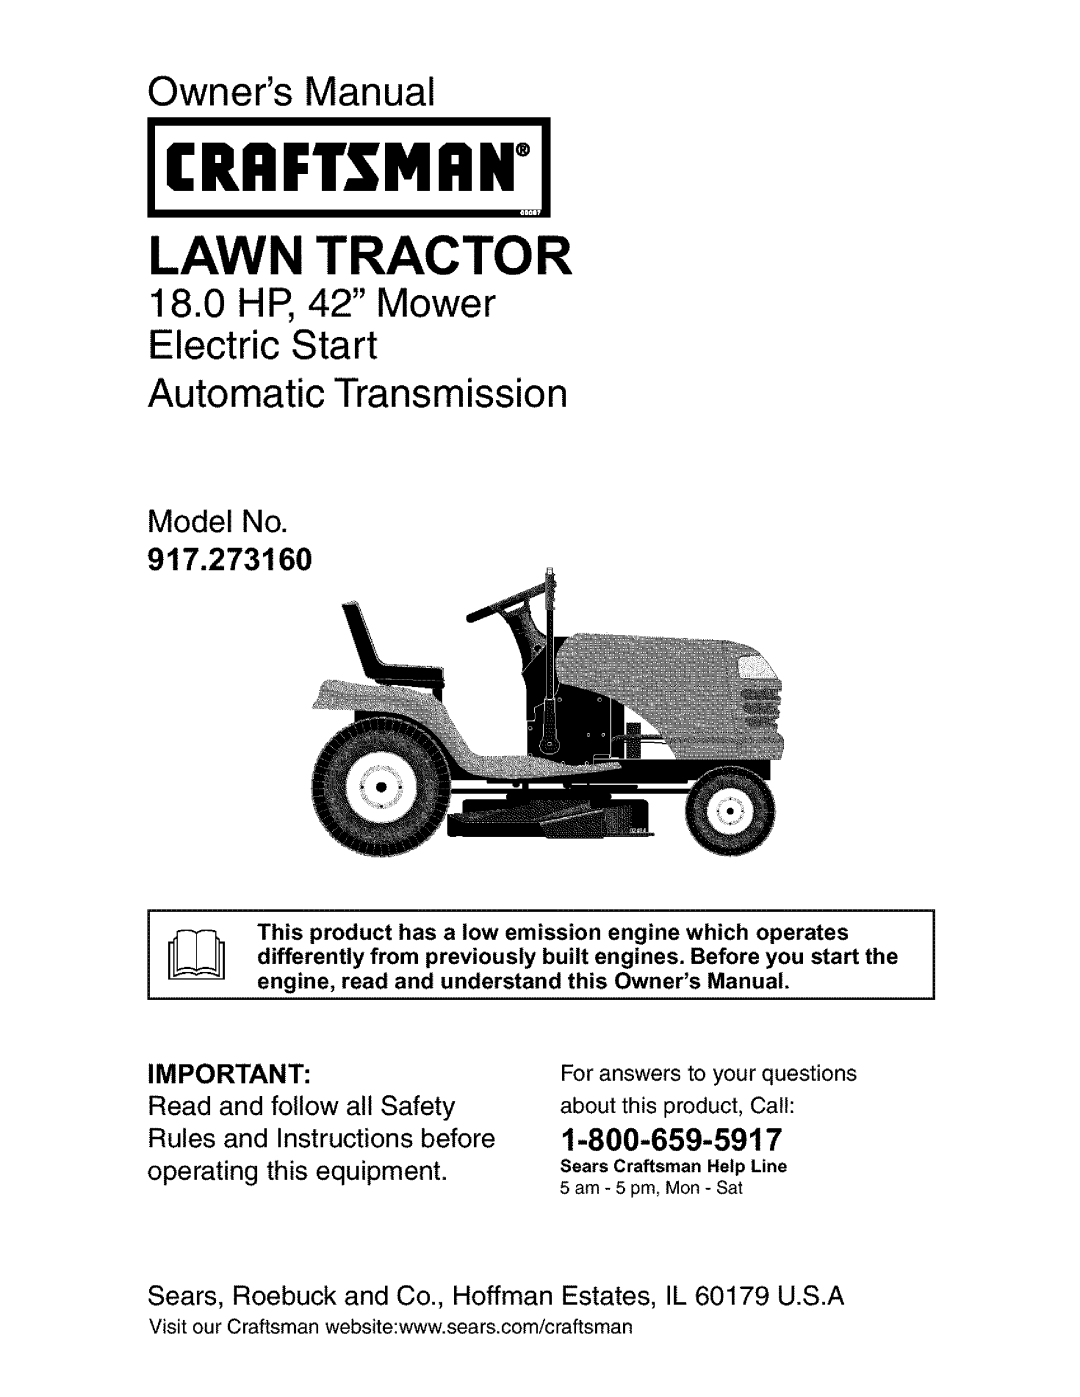 Craftsman 917.27316 owner manual 18.0HP, 42 Mower Electric Start, Model No, IC..FTSMeWl, Lawn Tractor, Owners Manual 